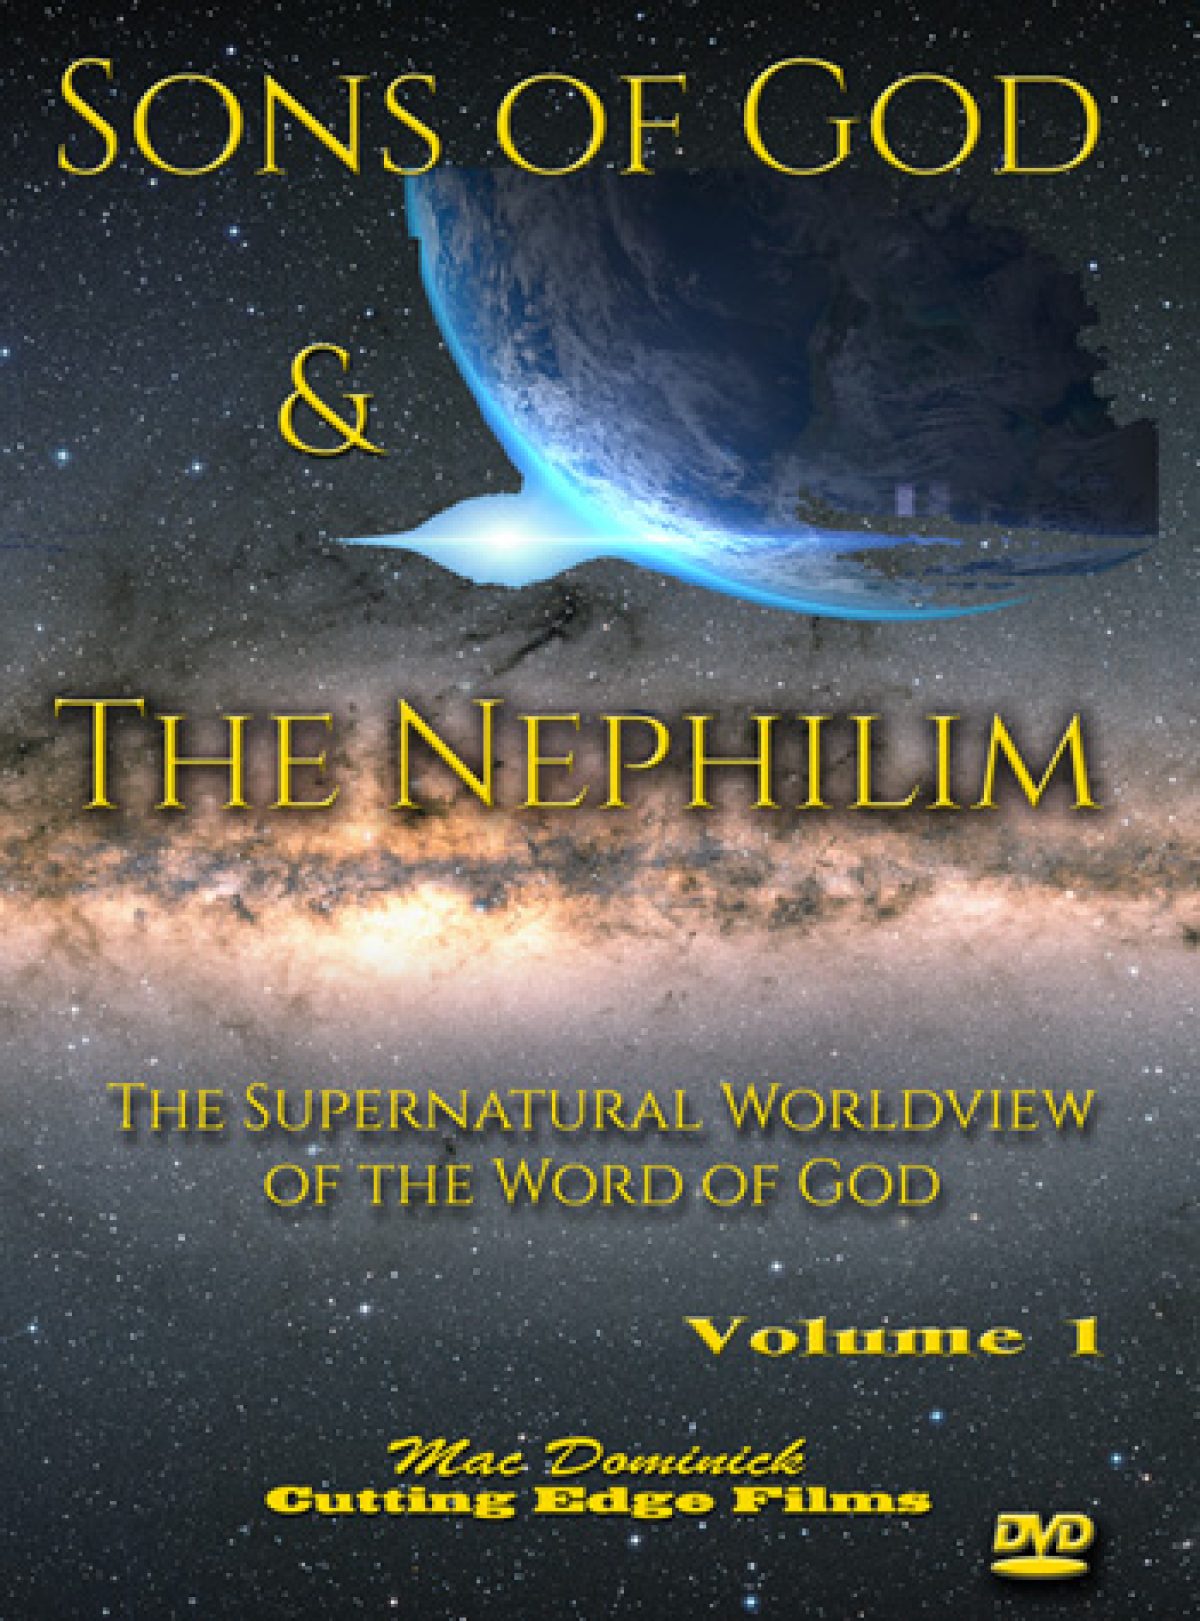 Sons of God & The Nephilim (DVD) Mac Dominick - SWRC